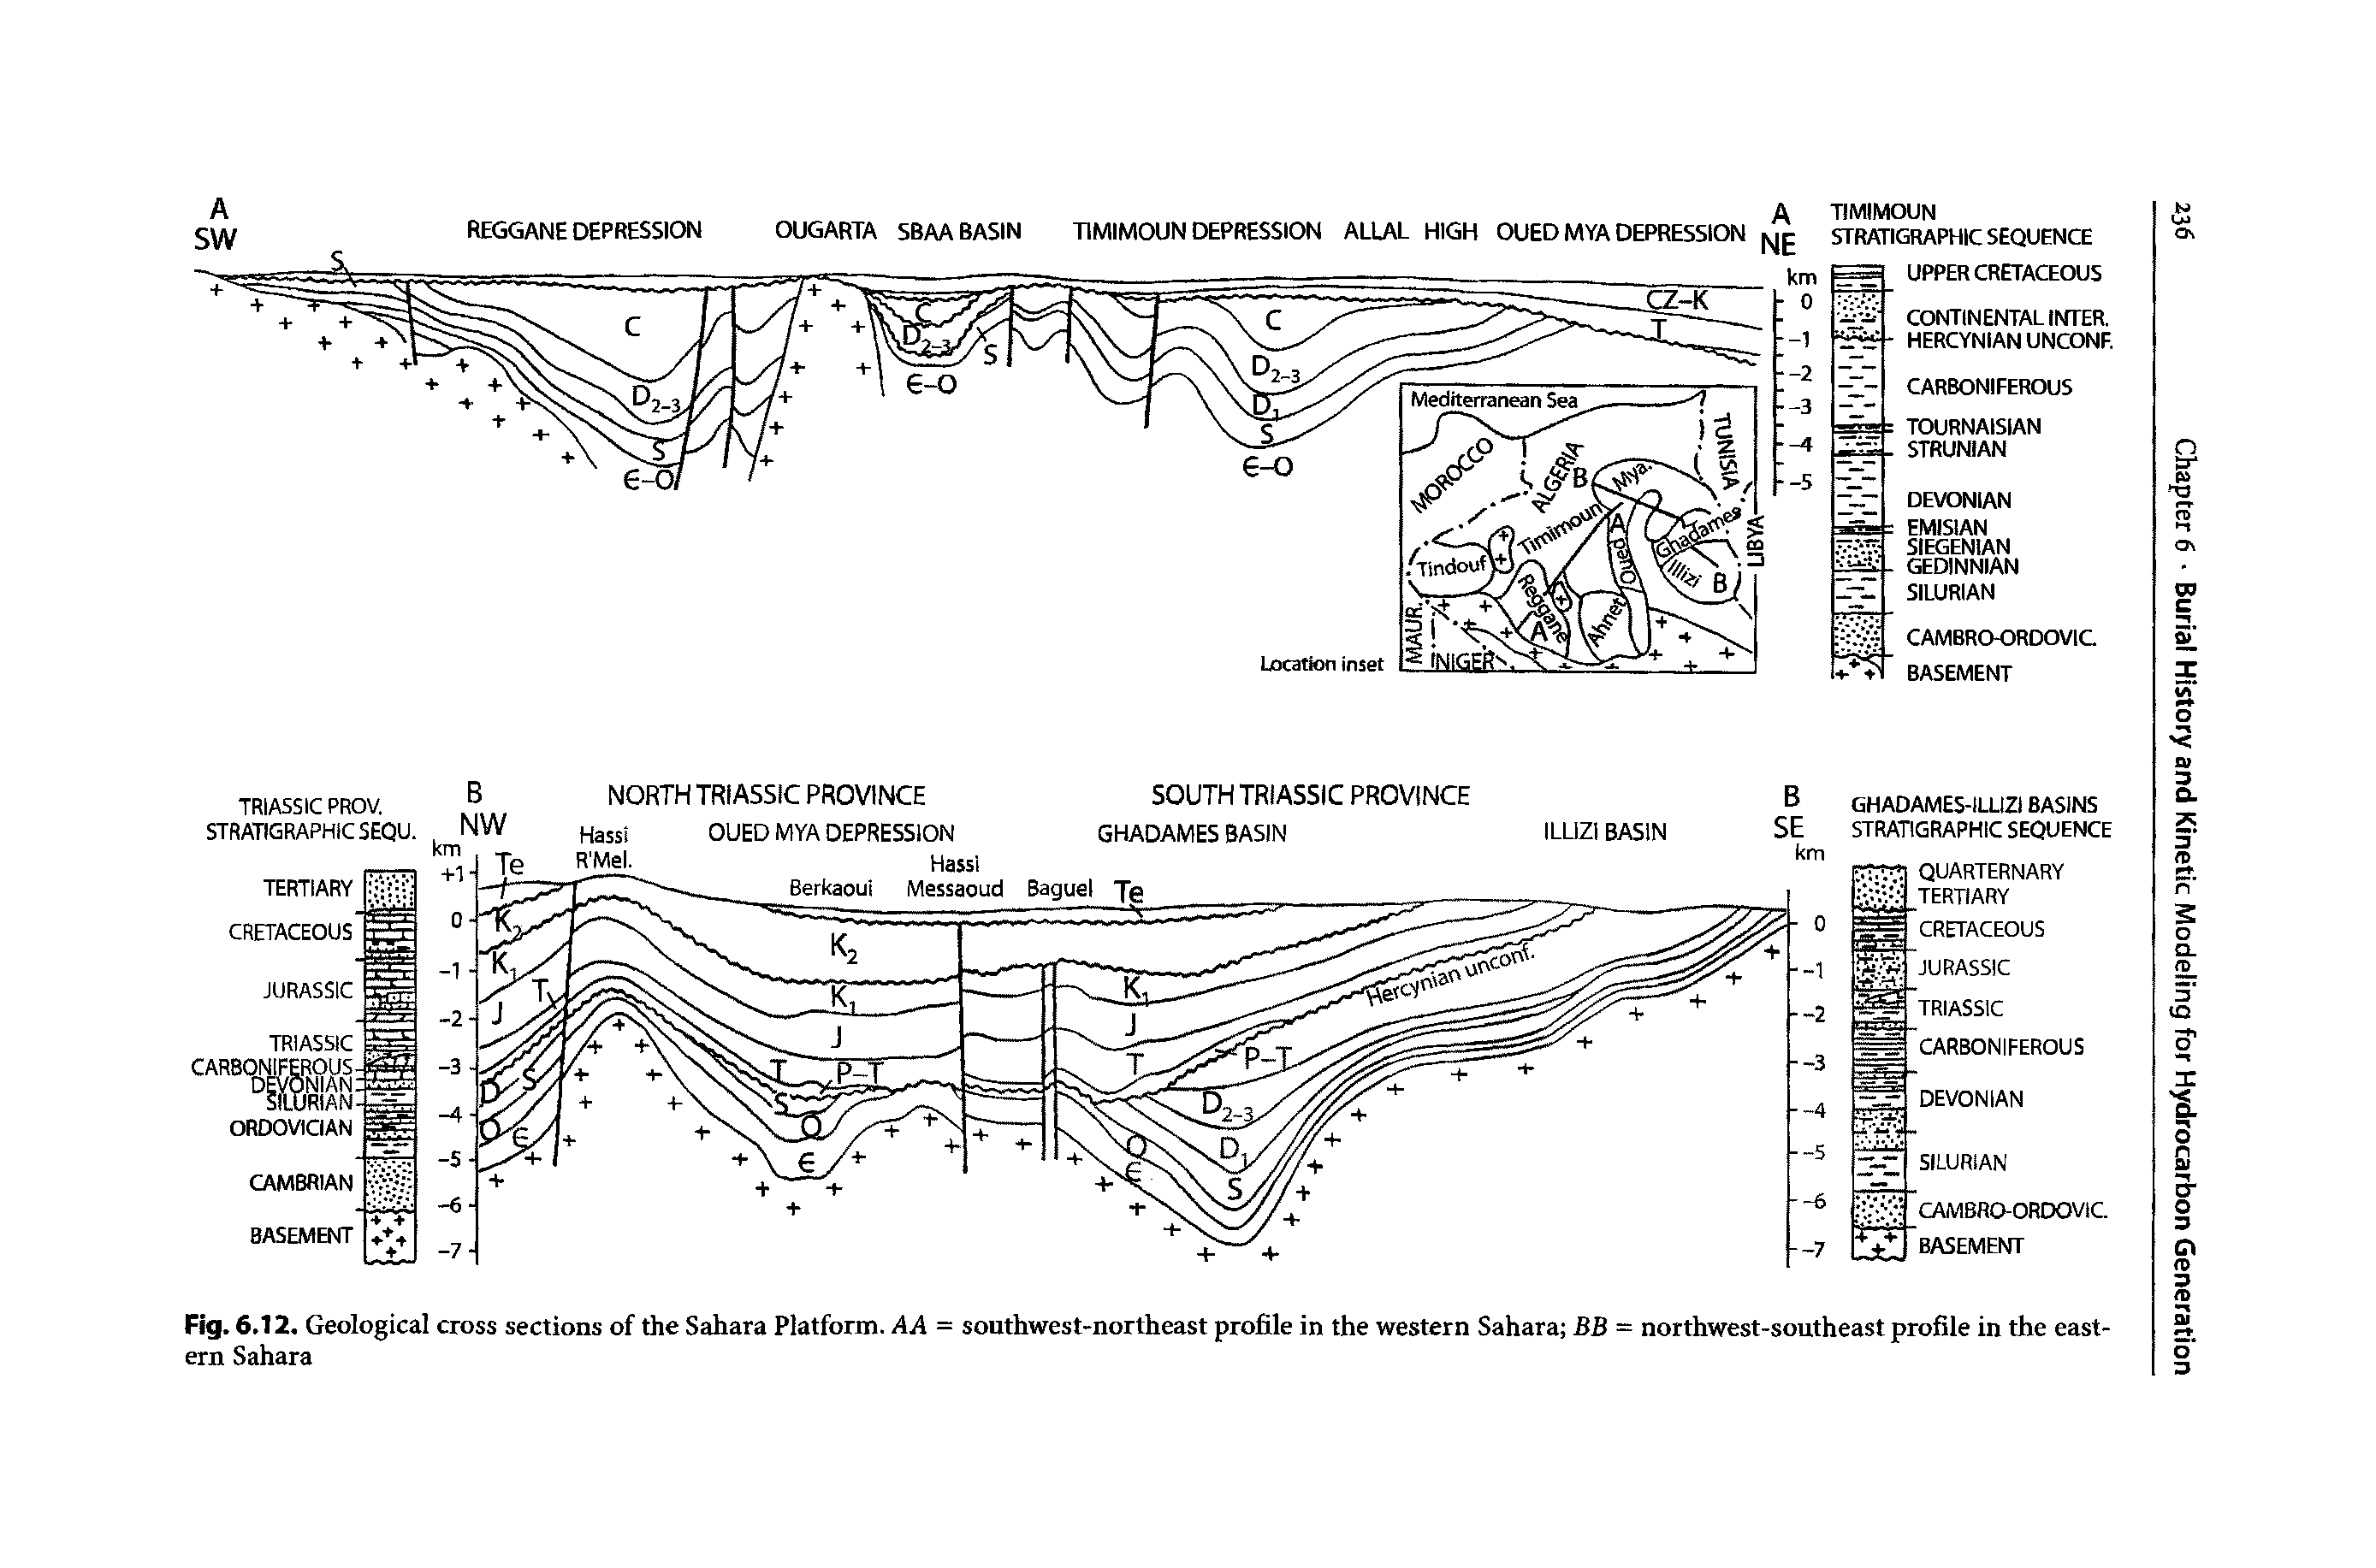 Fig. 6.12, Geological cross sections of the Sahara Platform. AA = southwest-northeast profile in the western Sahara BB = northwest-southeast profile in the eastern Sahara...